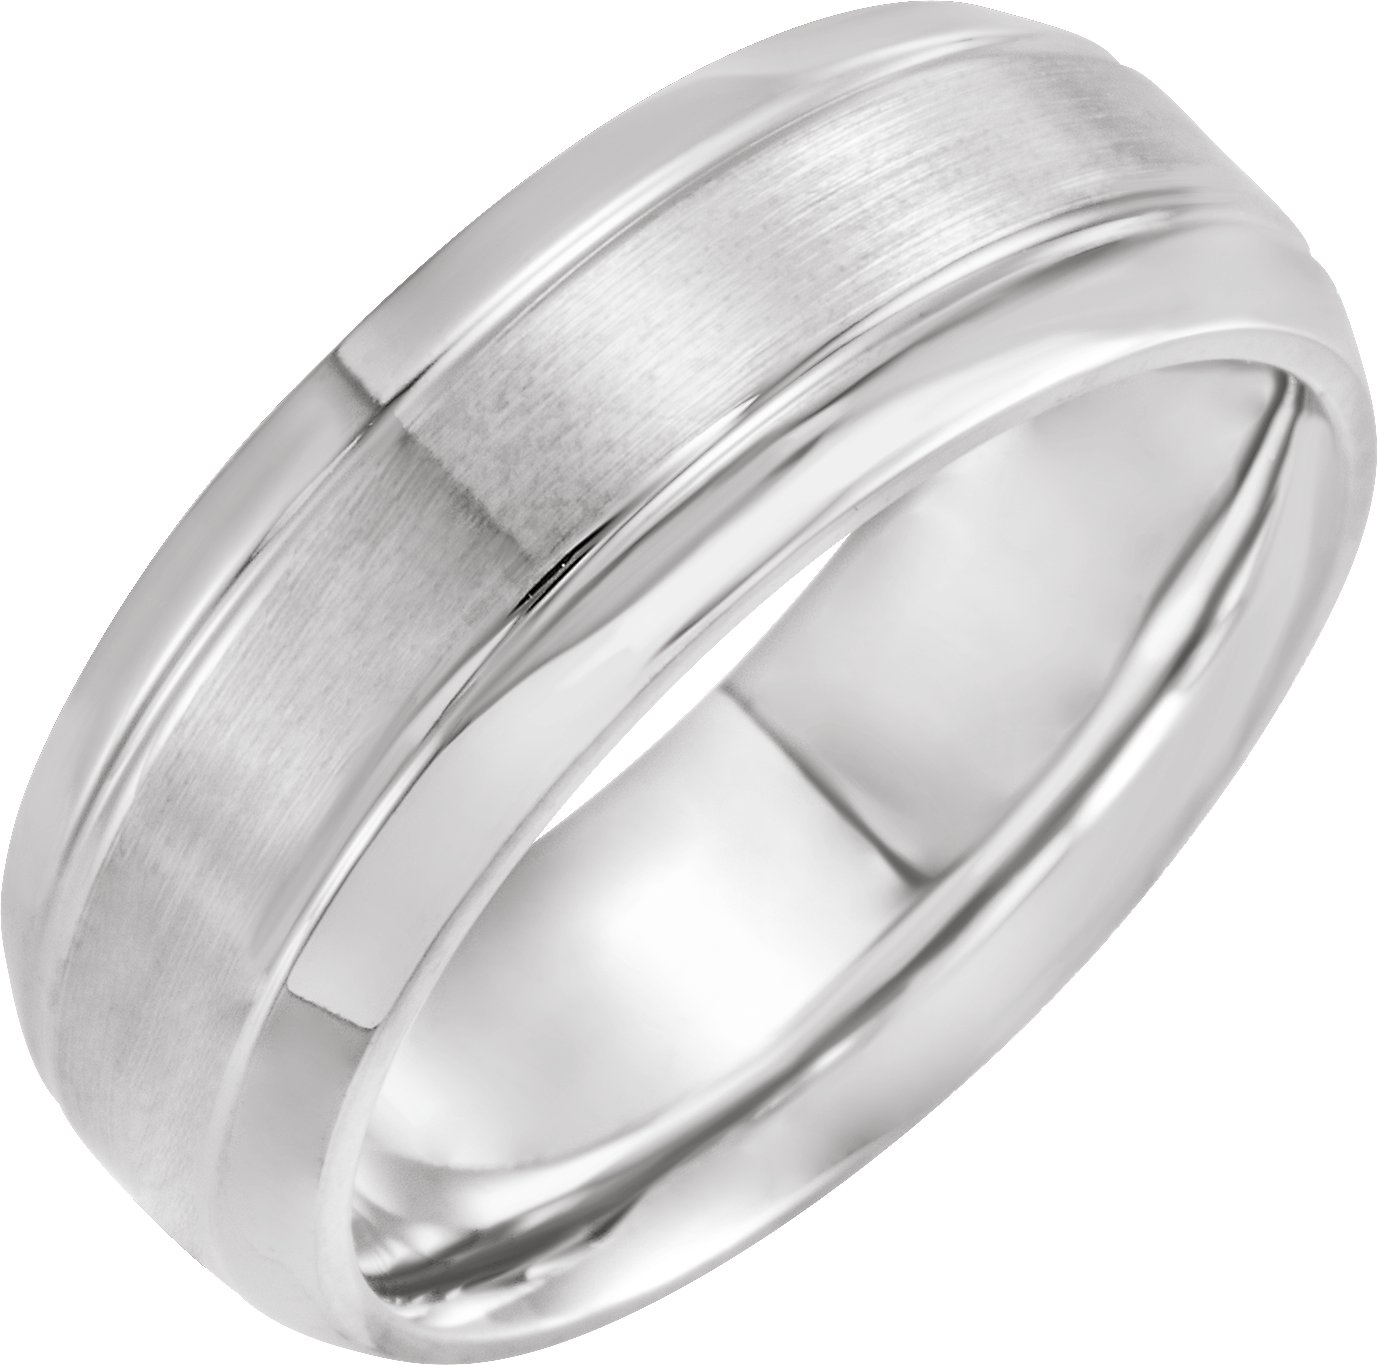 Continuum Sterling Silver 8 mm Grooved Beveled Edge Band Size 19 Ref 16265680